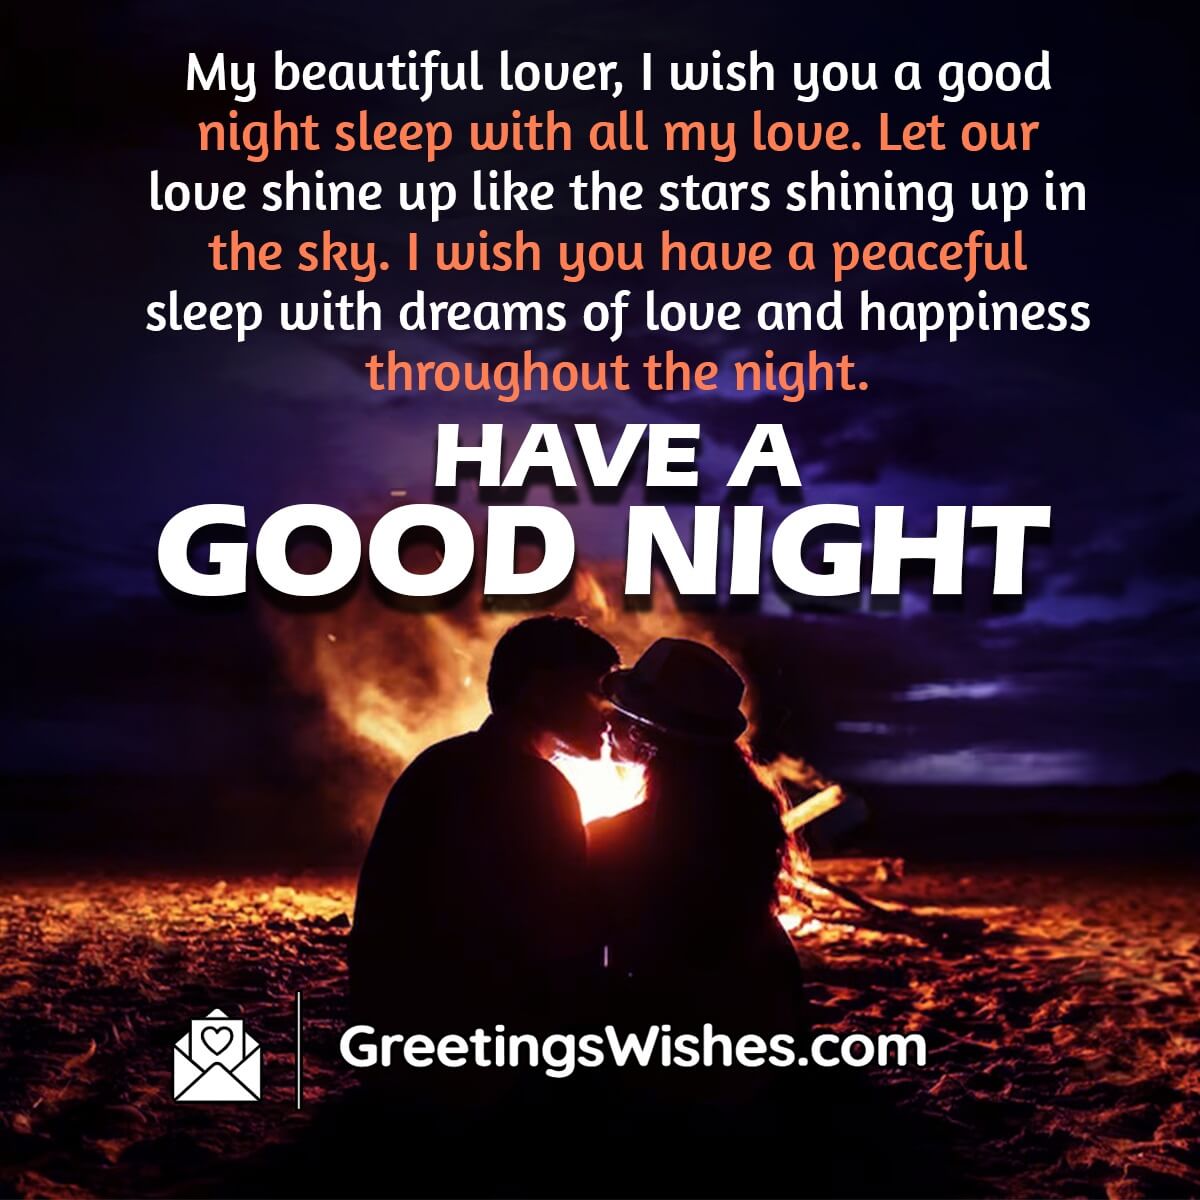 Good Night Wishes Messages to Lover - Greetings Wishes